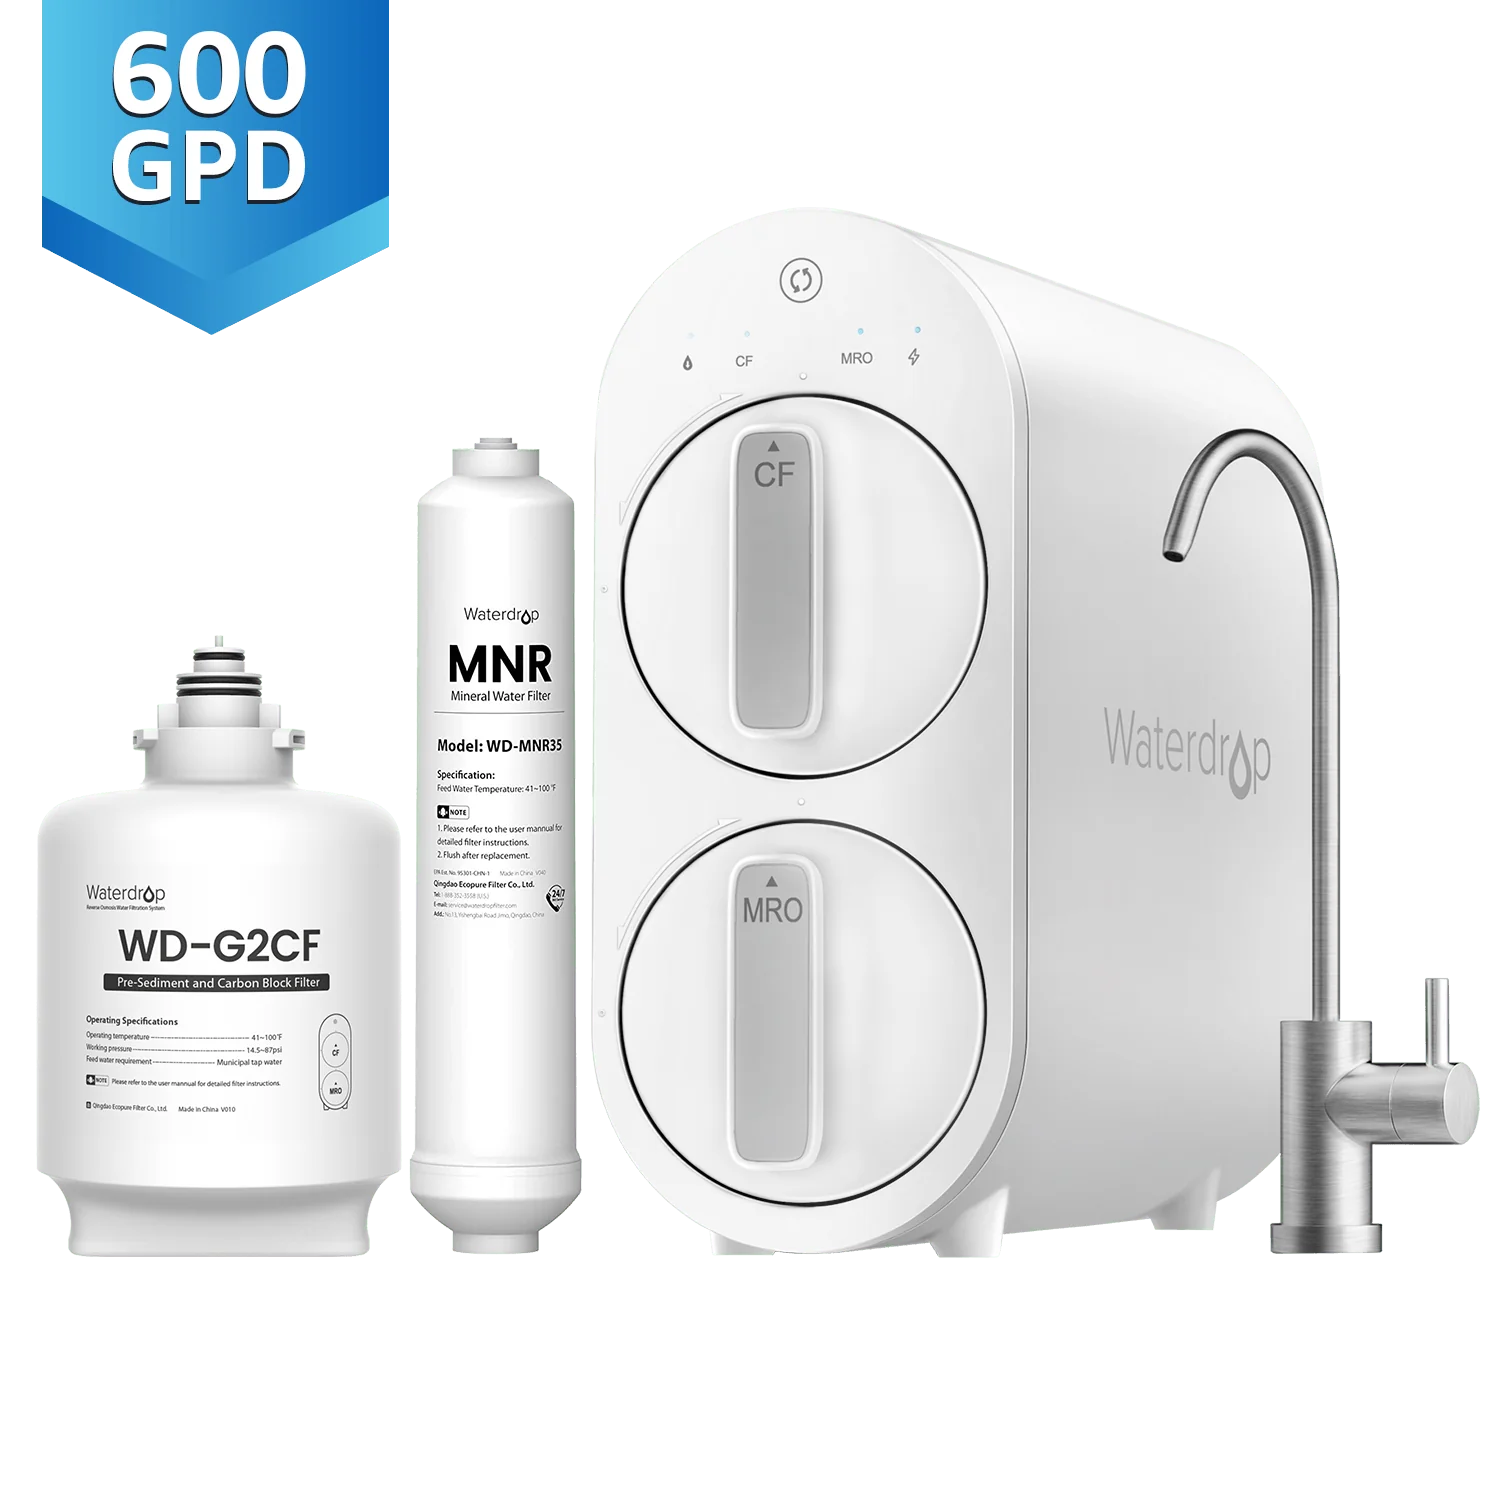 Image of Under sink water system G2P600 Remineralization RO System Combo Kit by Waterdrop